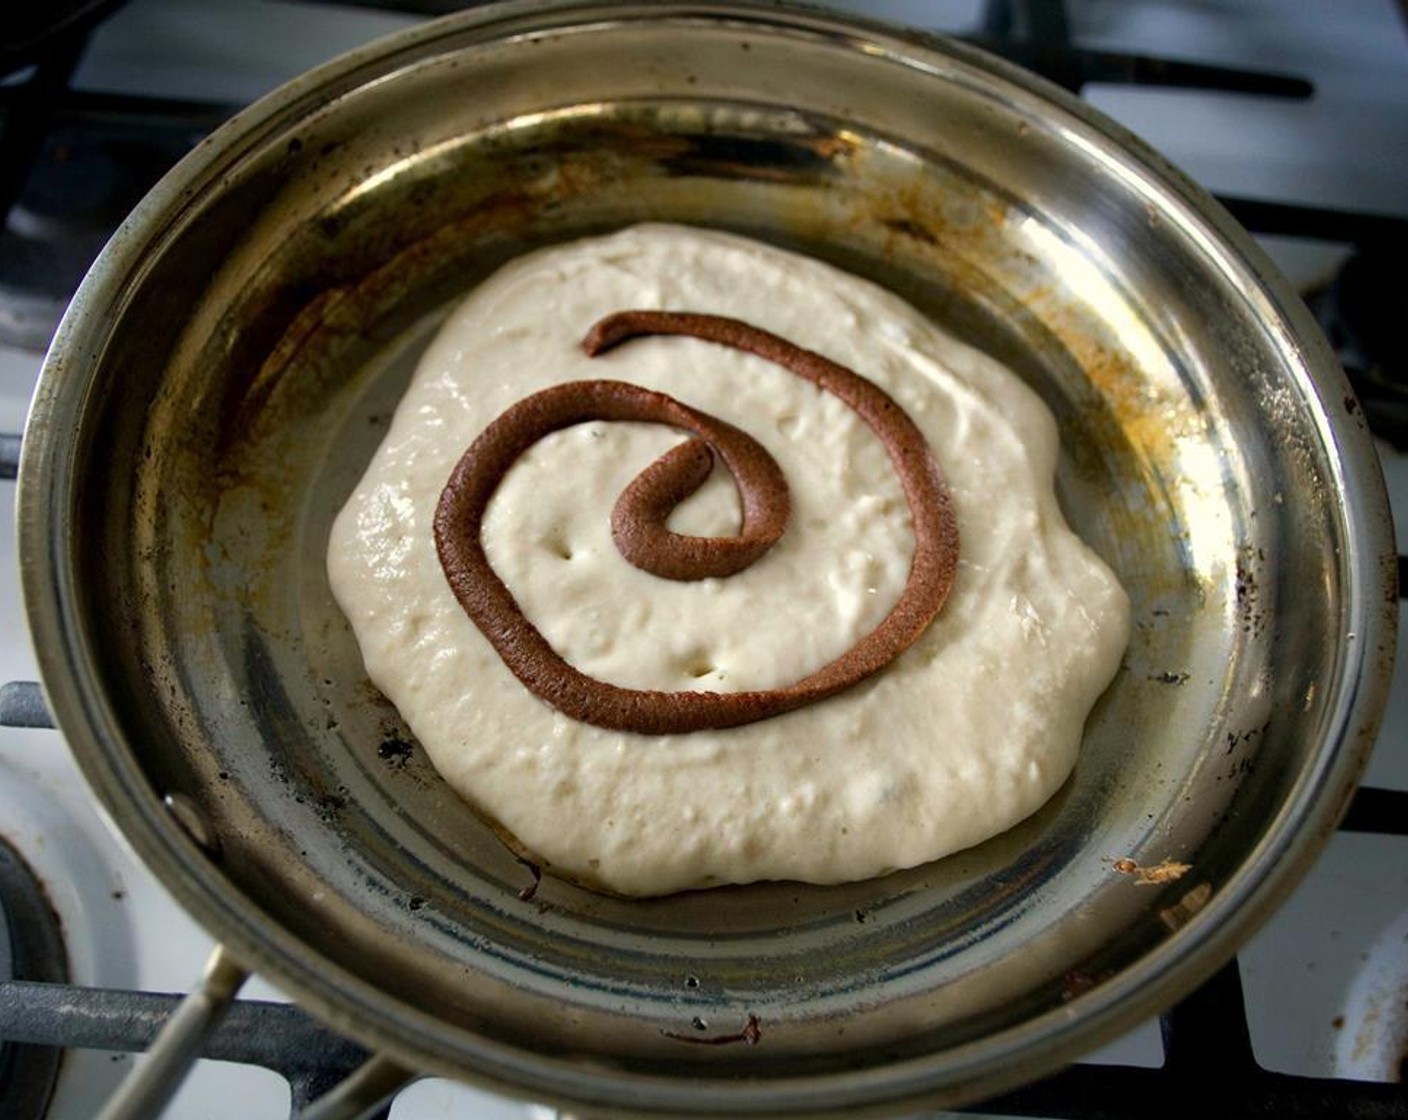 step 5 Over medium-high, heat a large frying pan and coat with nonstick cooking spray. Add 1/4 cup of pancake batter to the pan. Cook until the pancake's edges start to form bubbles, about 2 minutes, then "pipe" a swirl of the cinnamon filling.